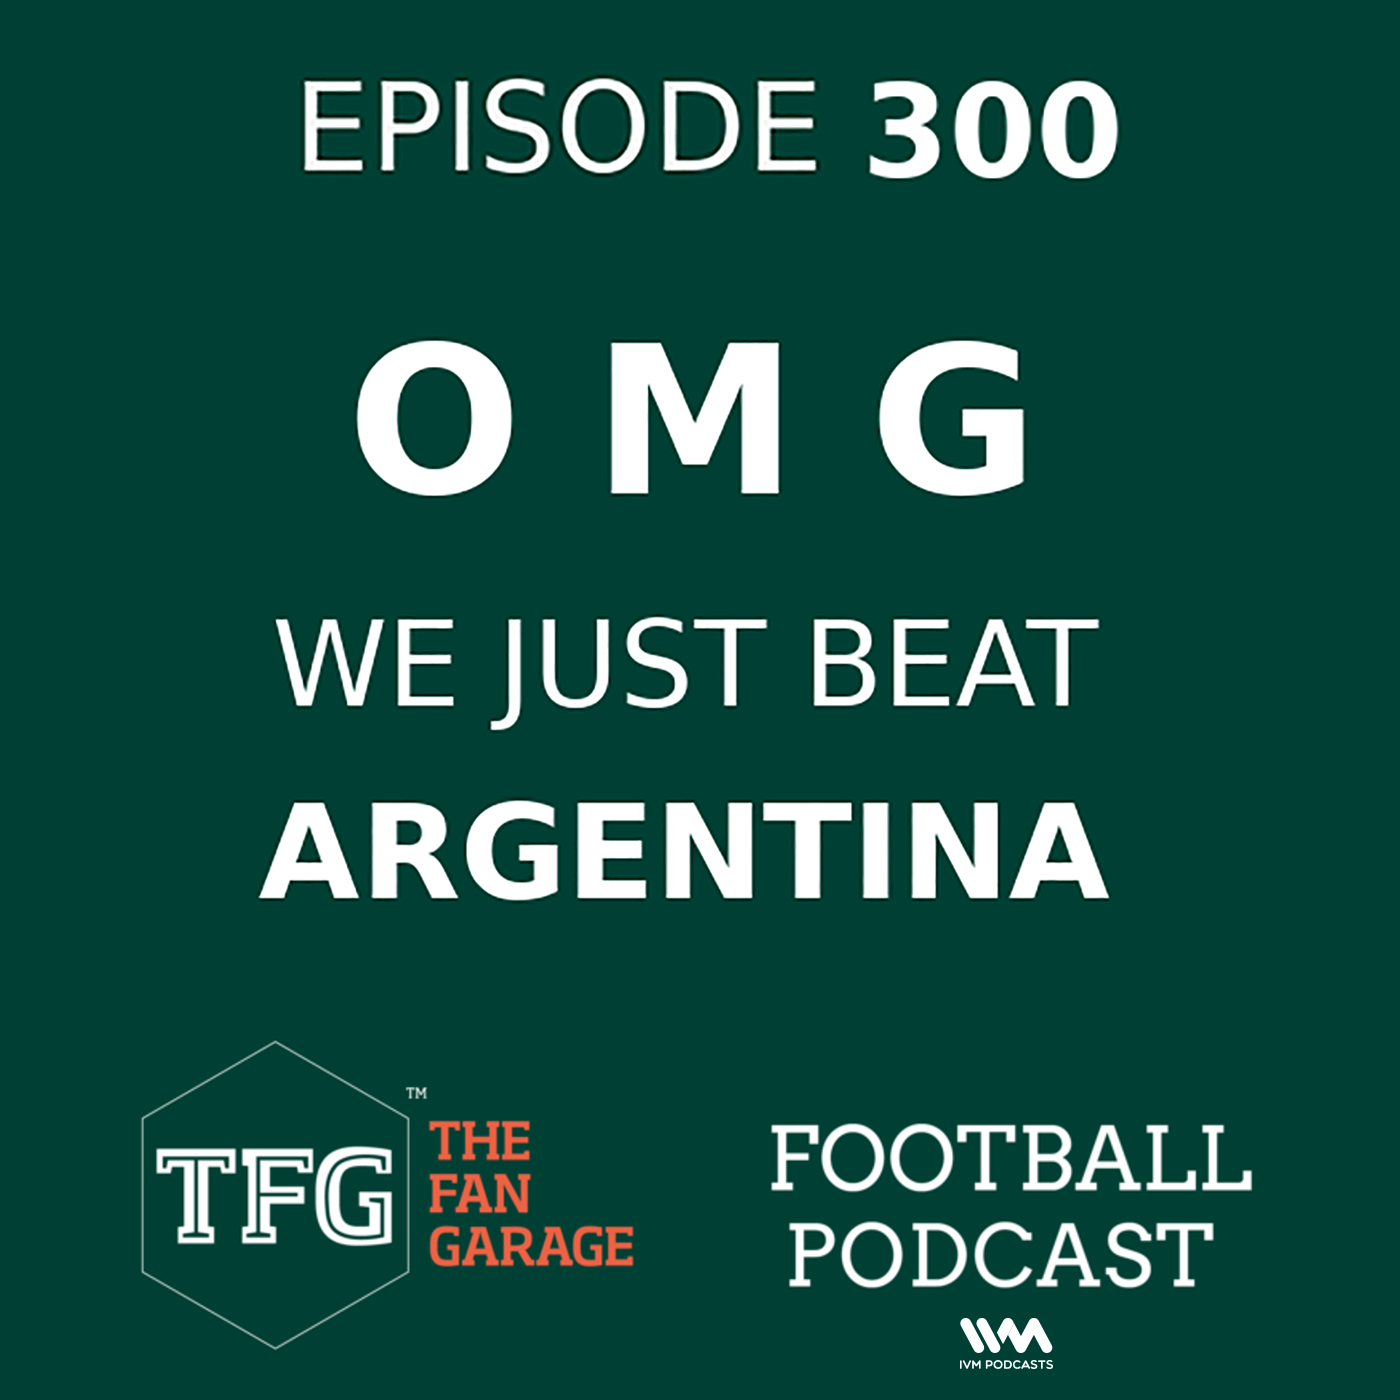 TFG Indian Football Ep. 300: OMG WE JUST BEAT ARGENTINA!